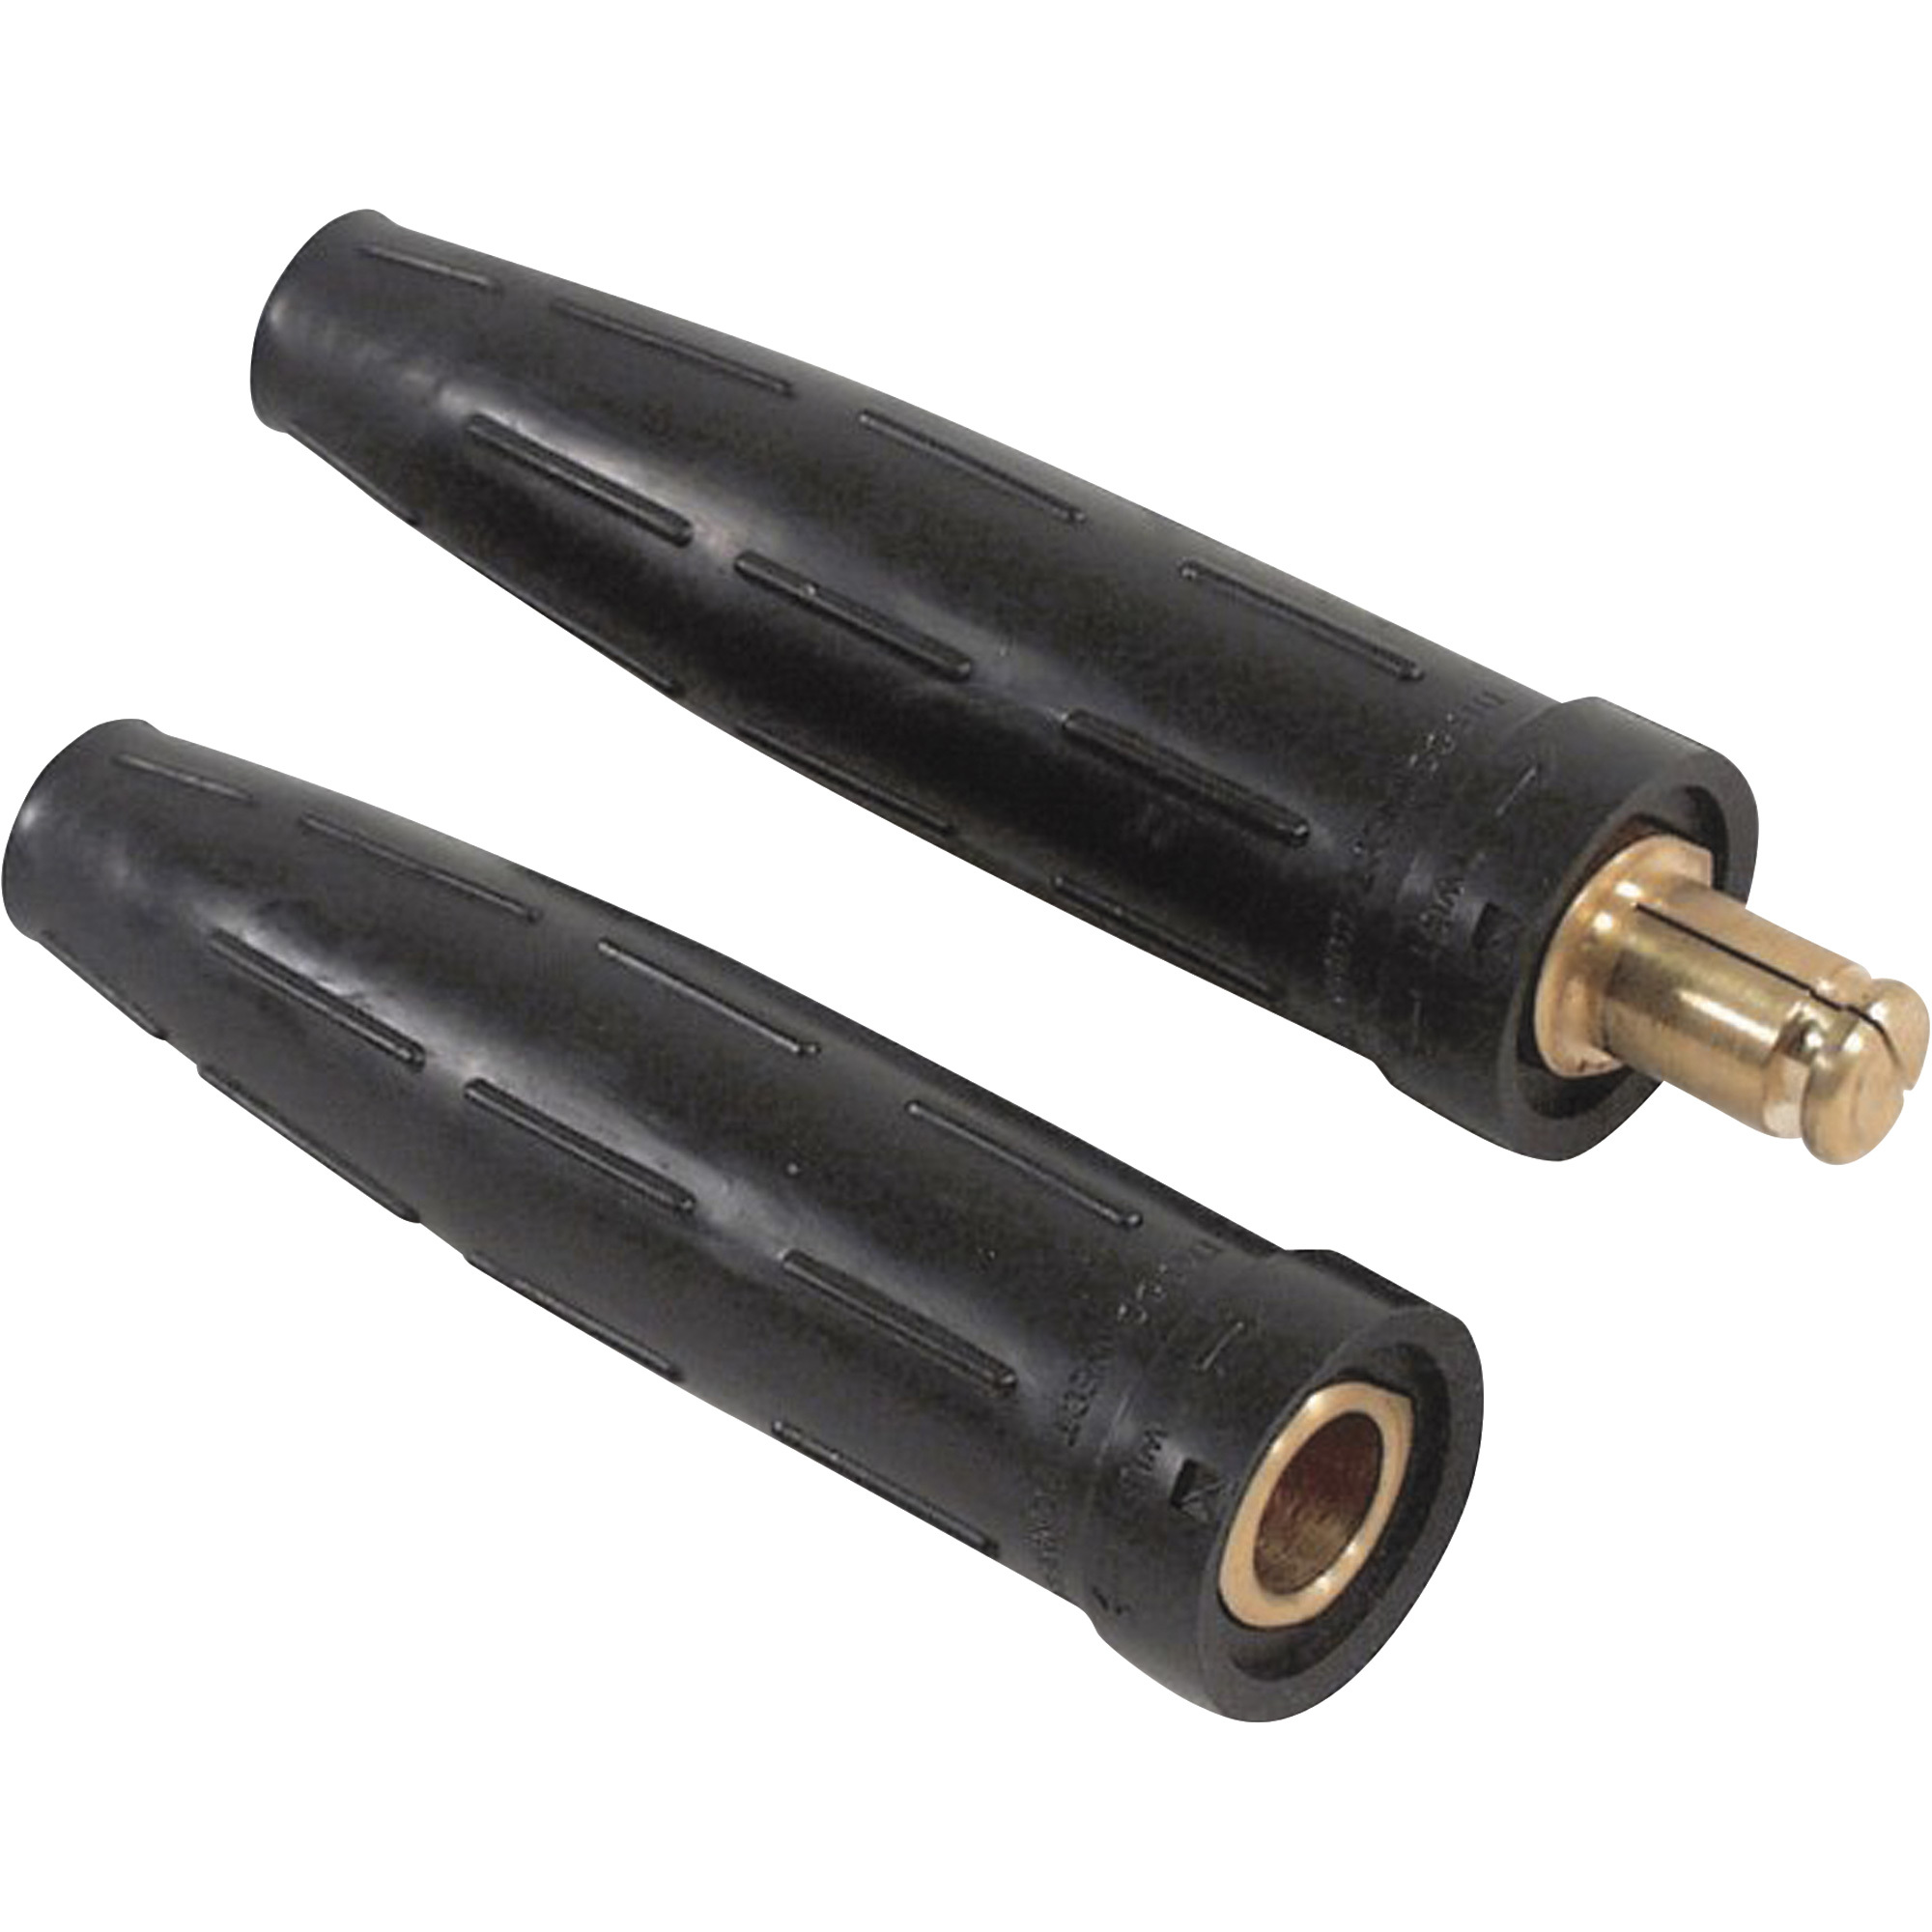 Hobart Welding Cable Connector â For No. 1 to No. 3/0 Cable, Model 770033